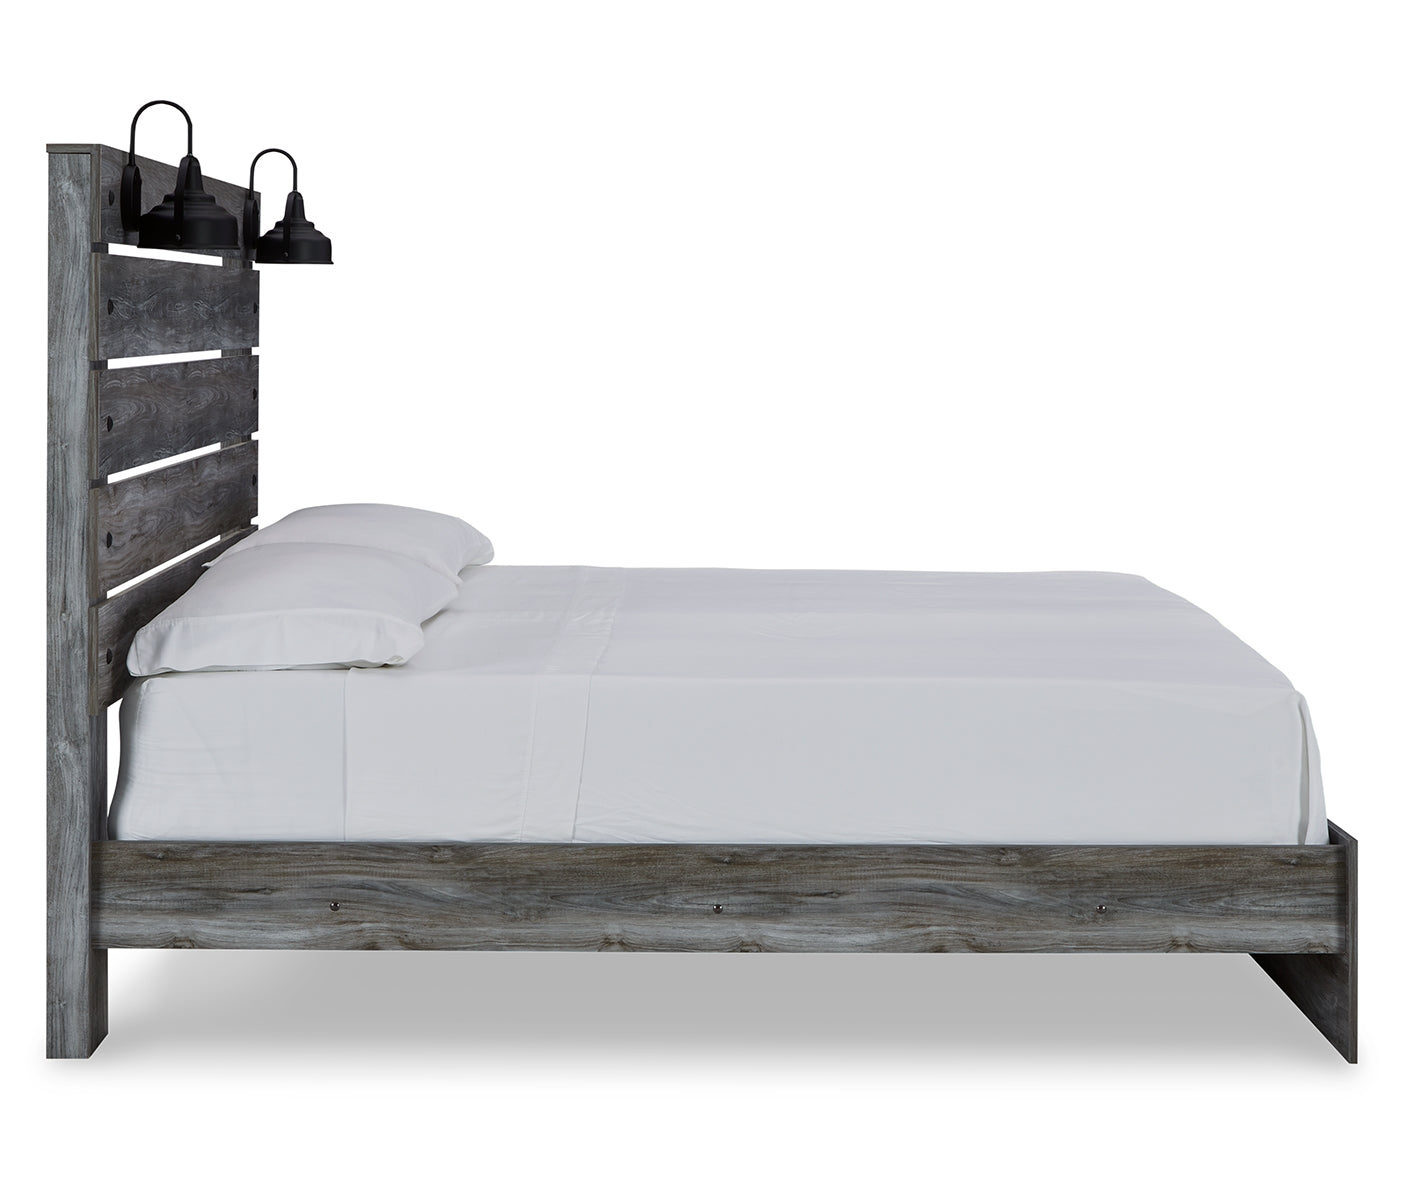 Baystorm King Panel Bed with Mirrored Dresser and 2 Nightstands